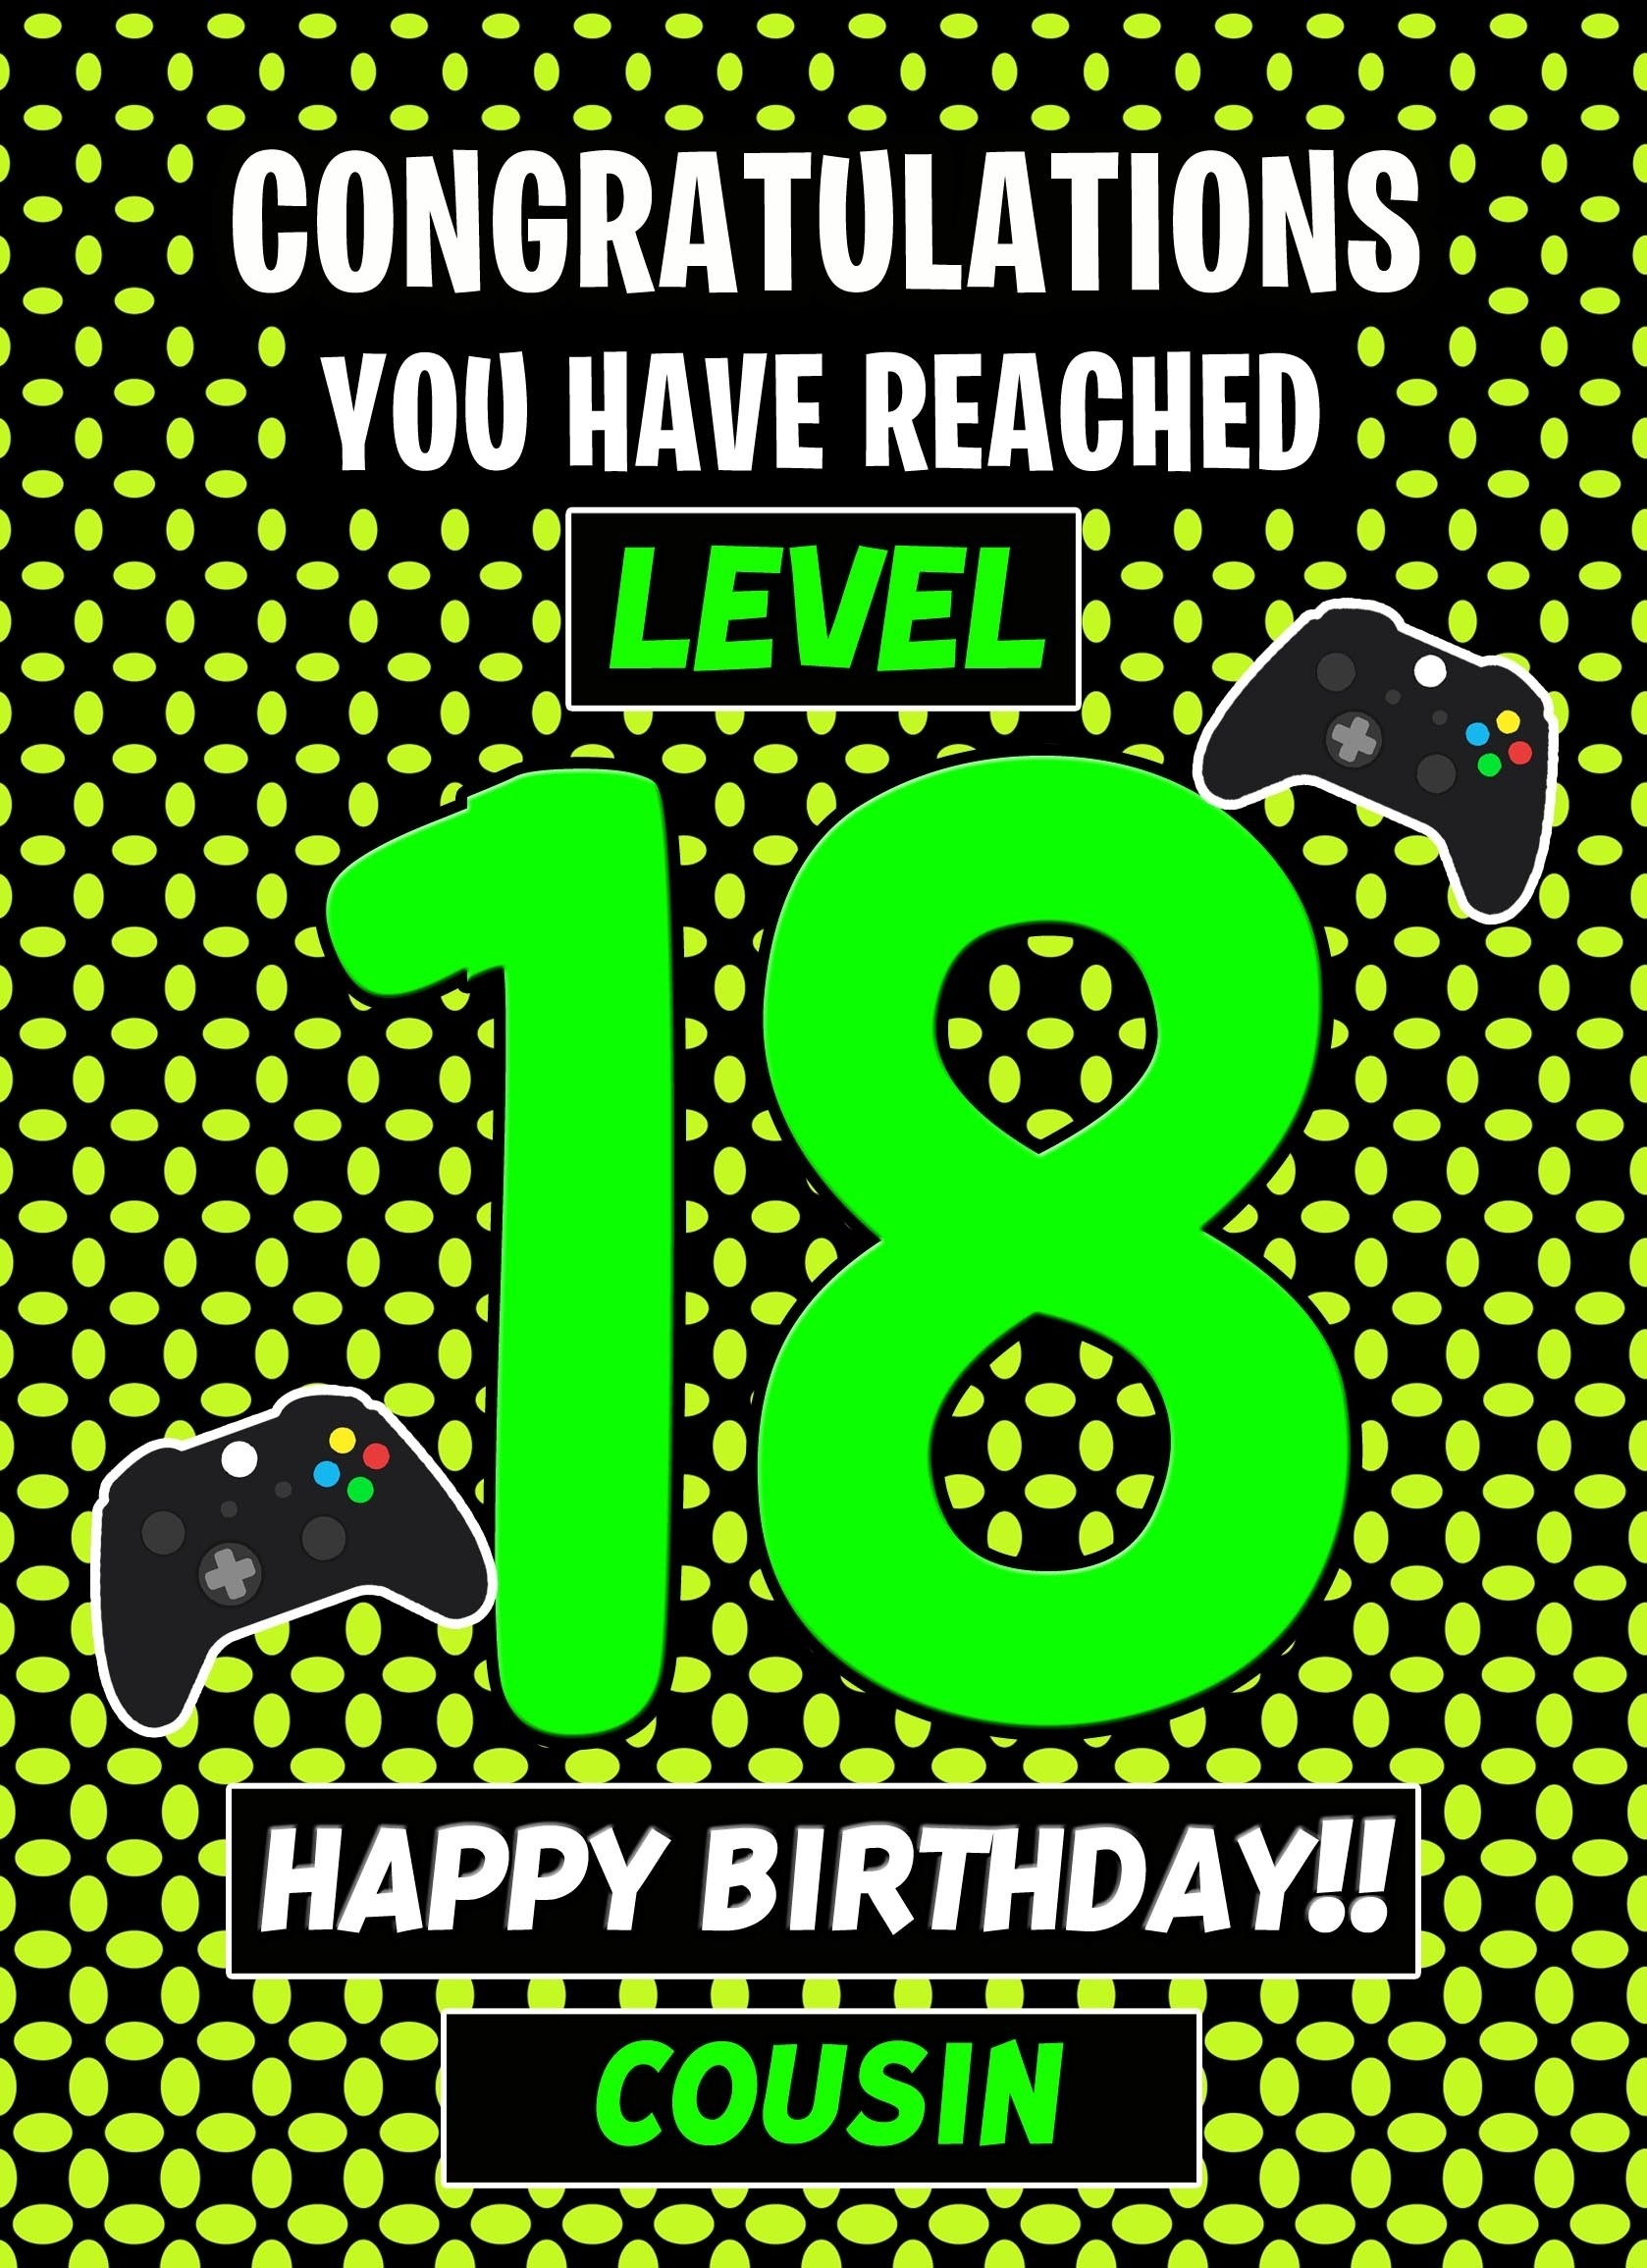 Cousin 18th Birthday Card (Level Up Gamer)